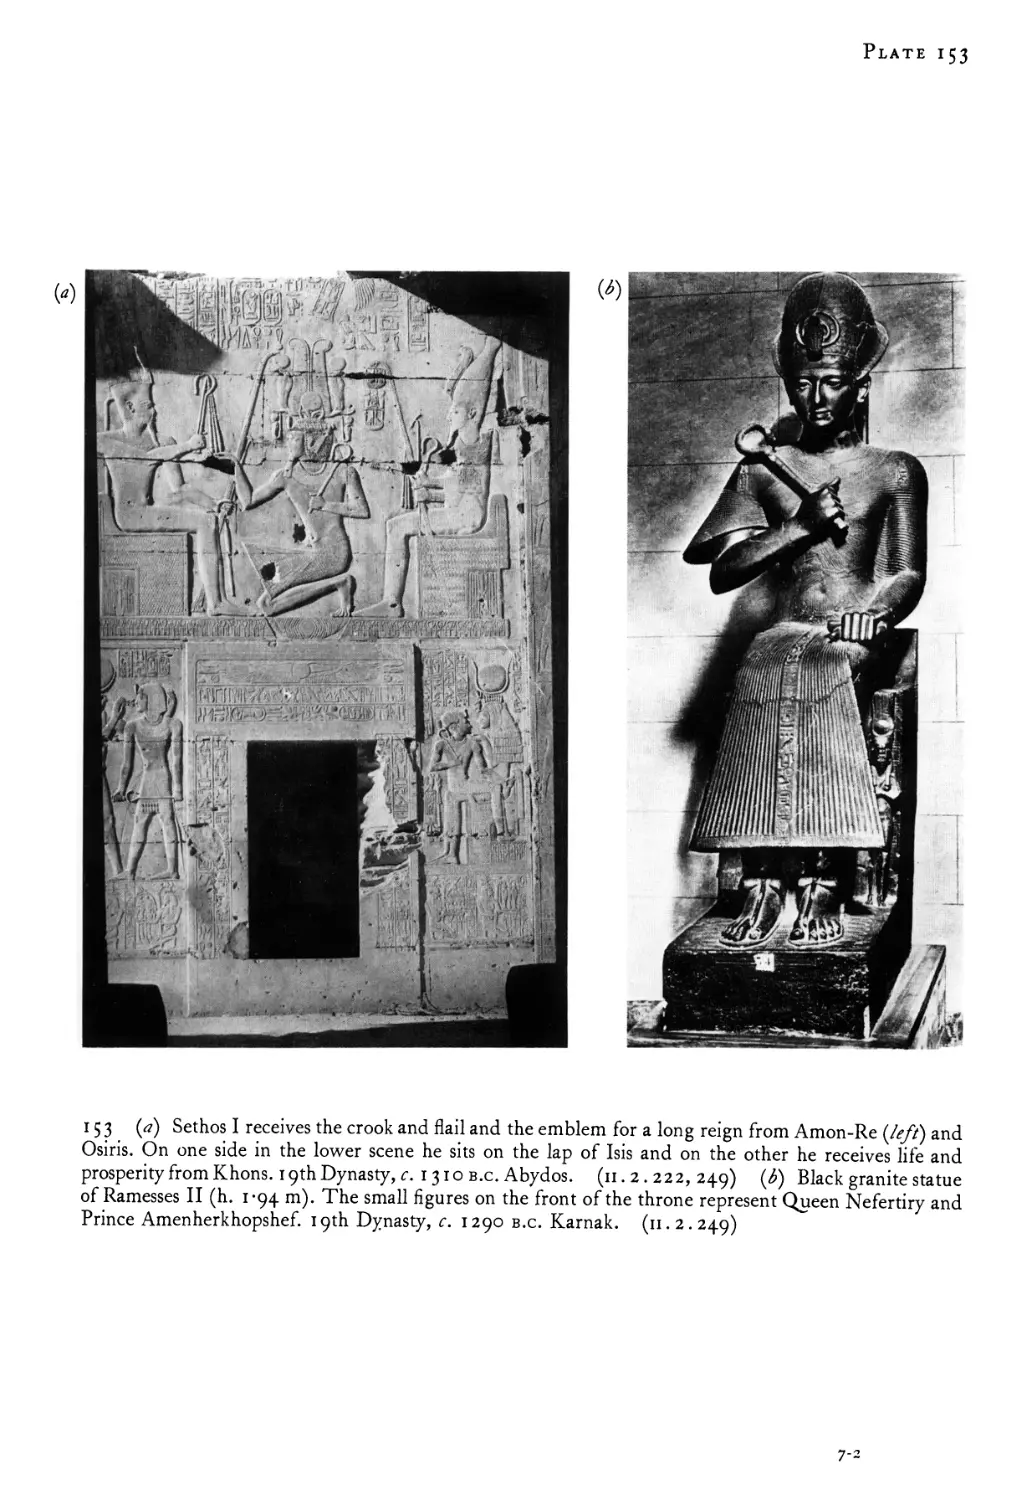 EGYPT: FROM THE INCEPTION OF THE NINETEENTH DYNASTY TO THE DEATH OF RAMESSES III